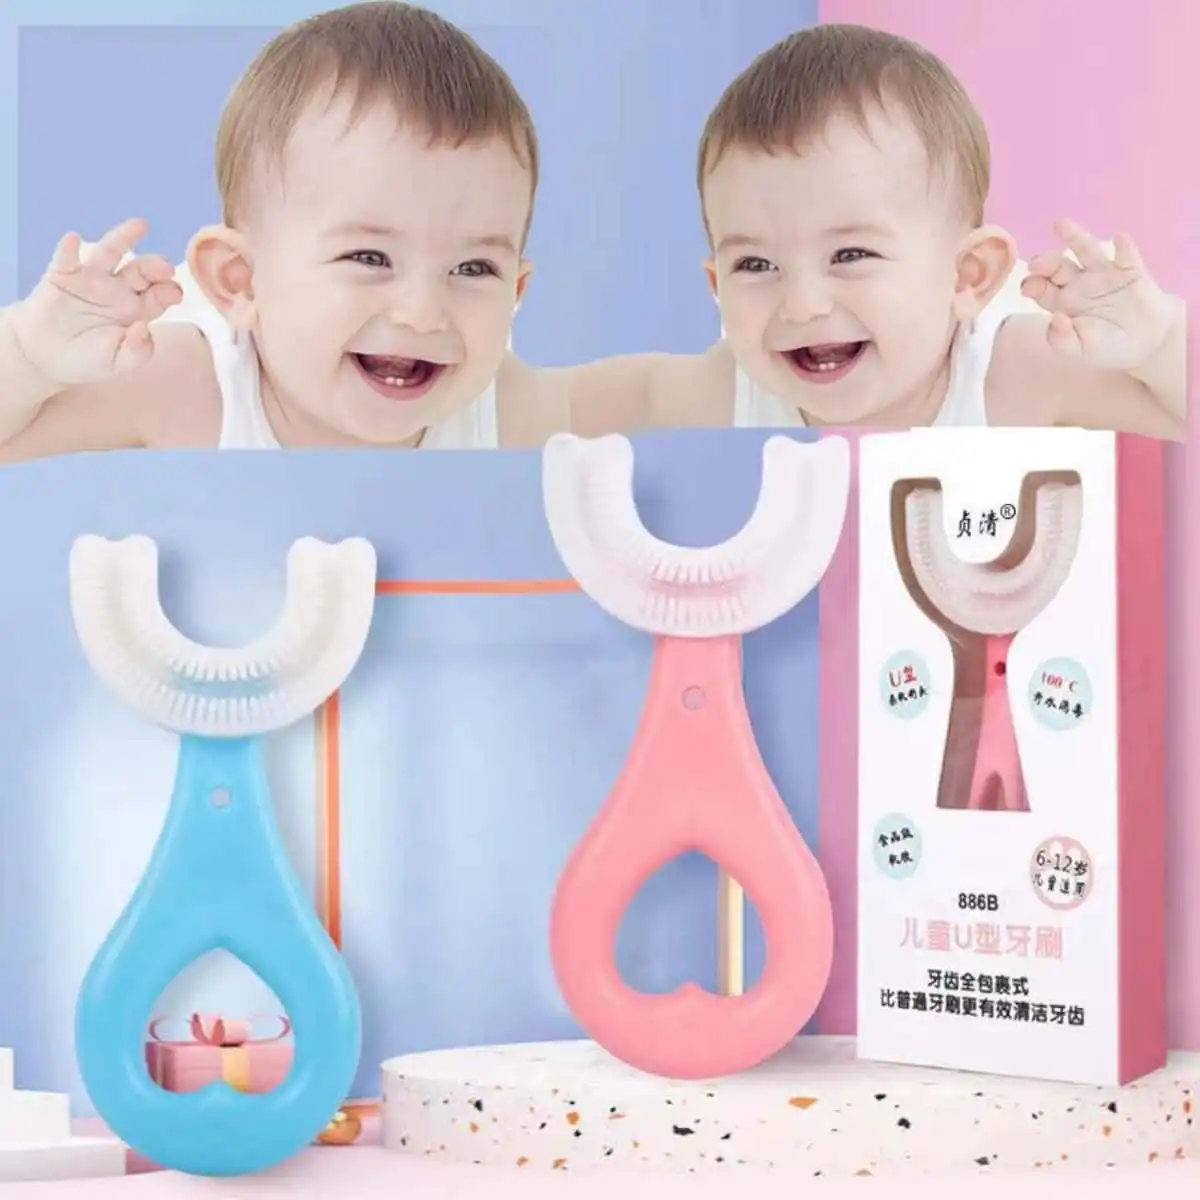 Pack of 3 U-Shaped Children's Toothbrushes